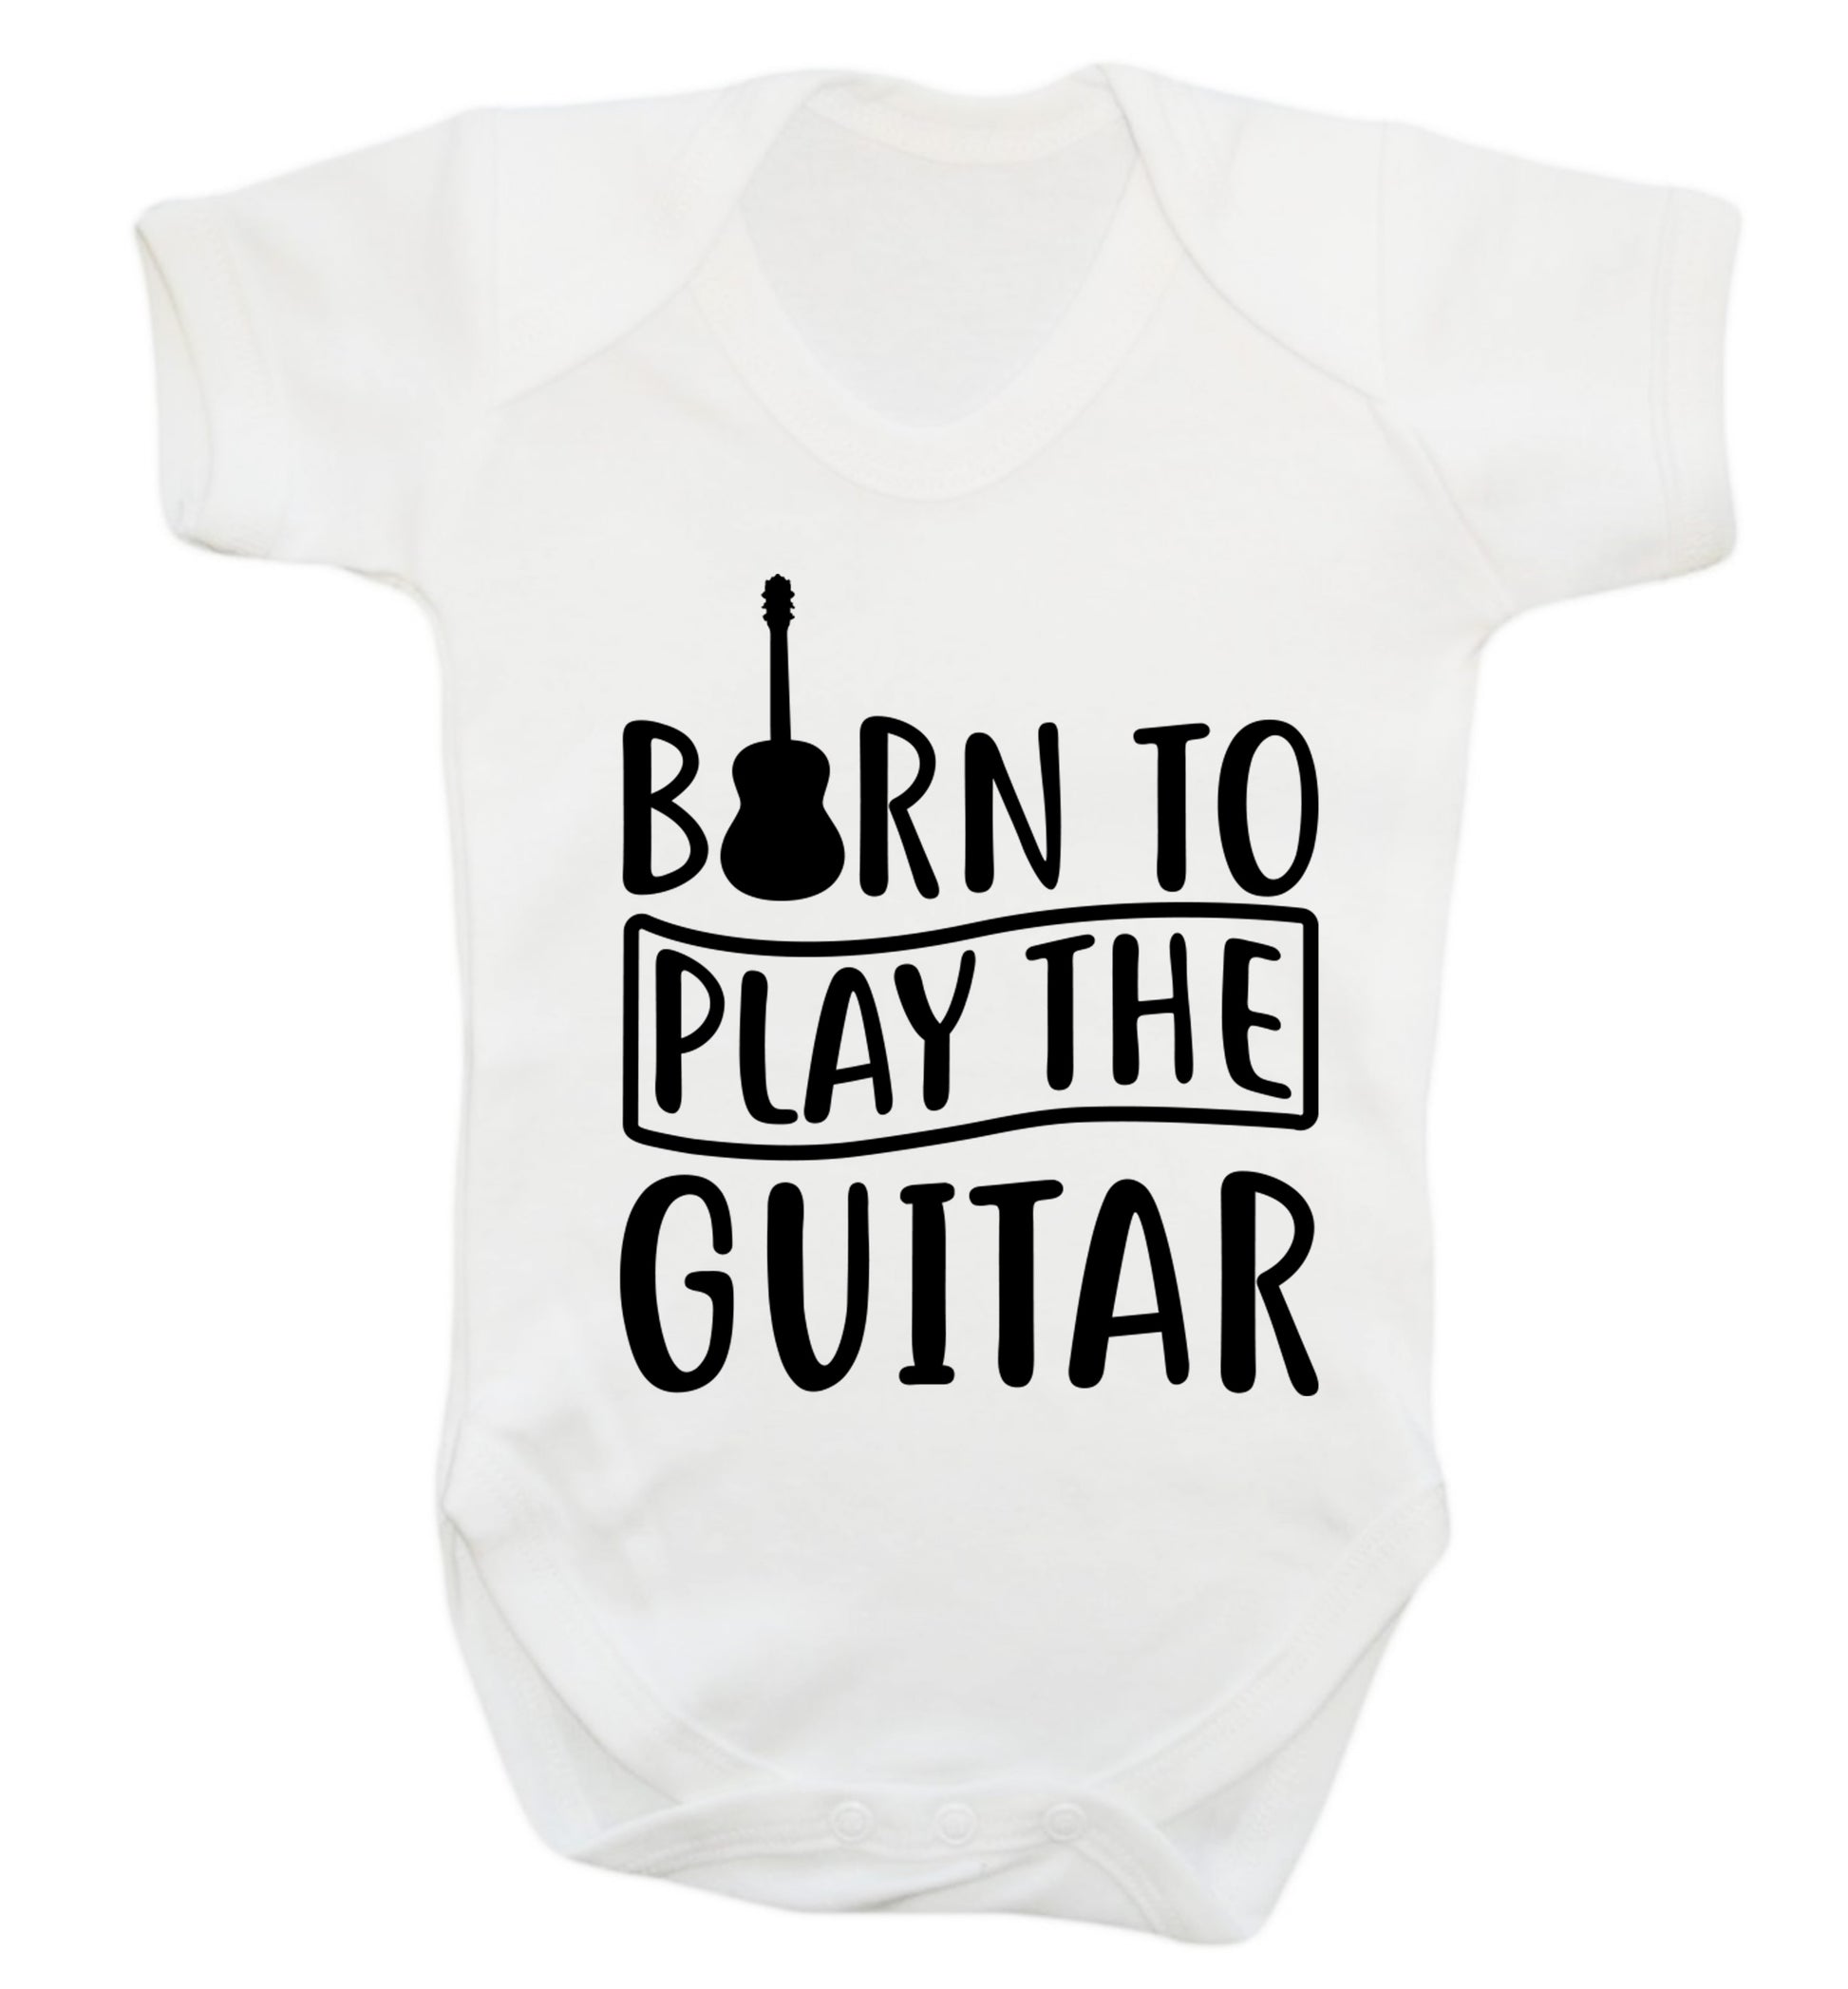 Born to play the guitar Baby Vest white 18-24 months